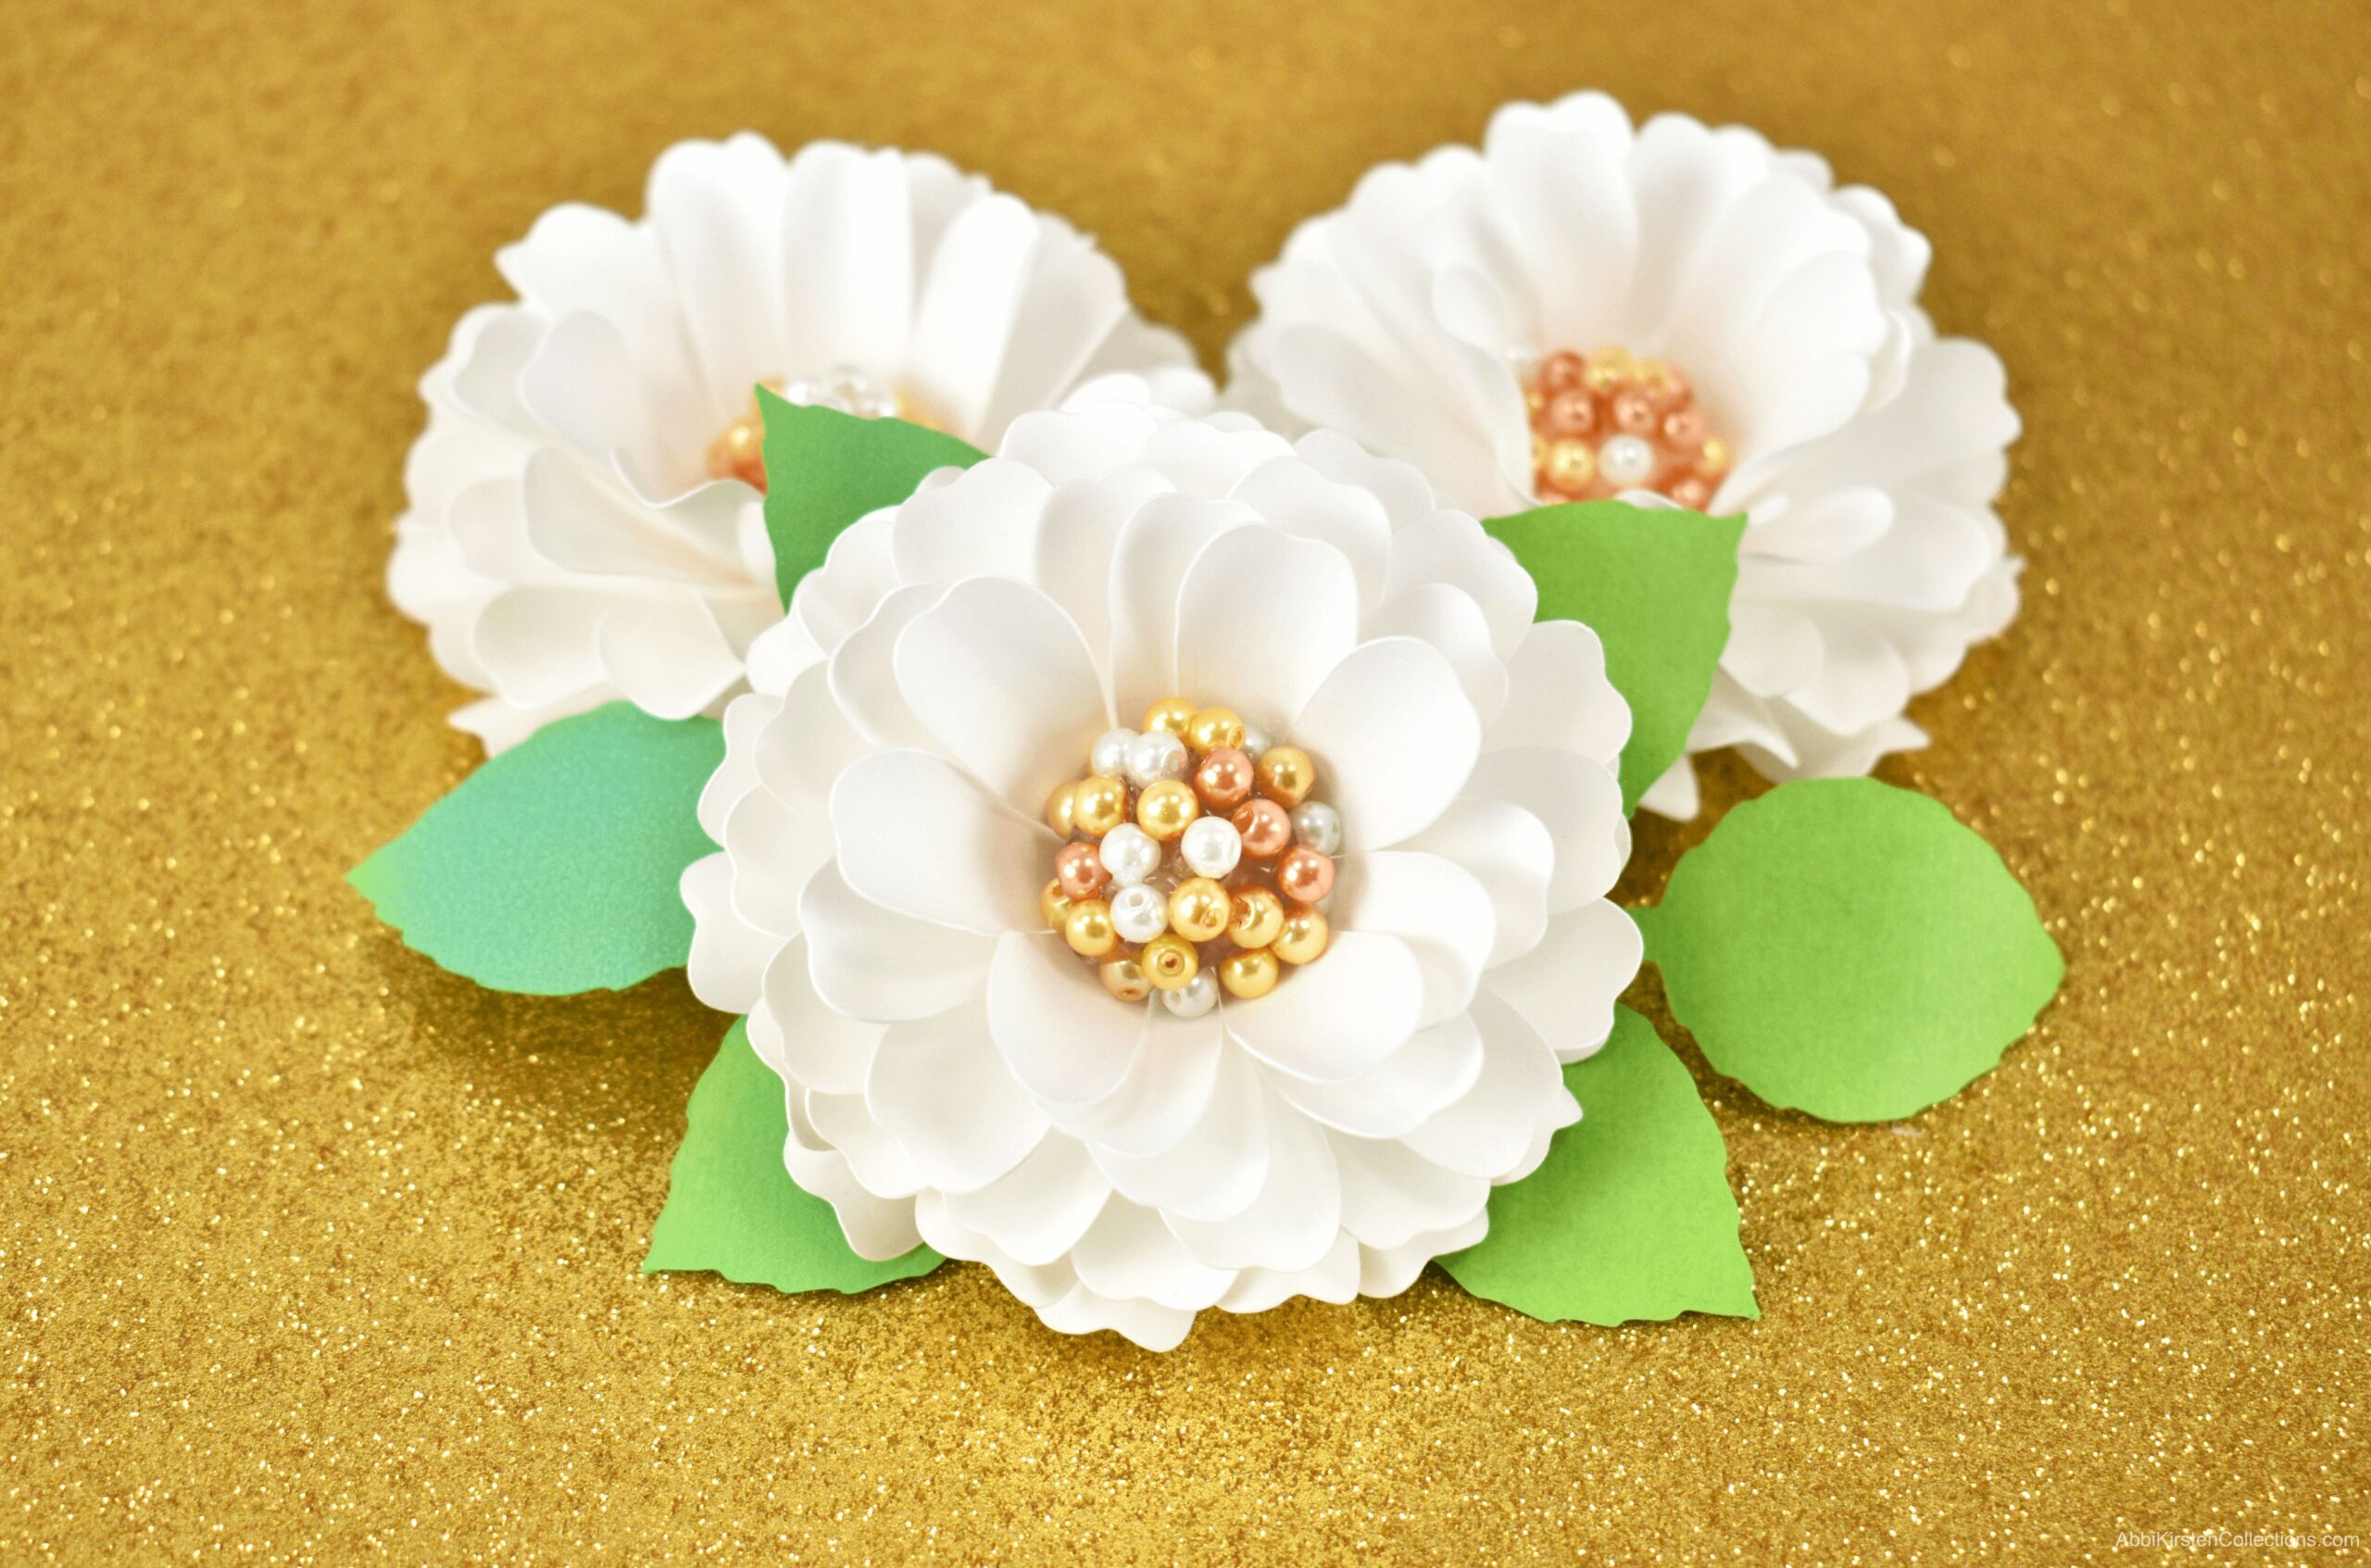 Three small white paper dahlia flowers with mini pearl centers sit on a gold background.